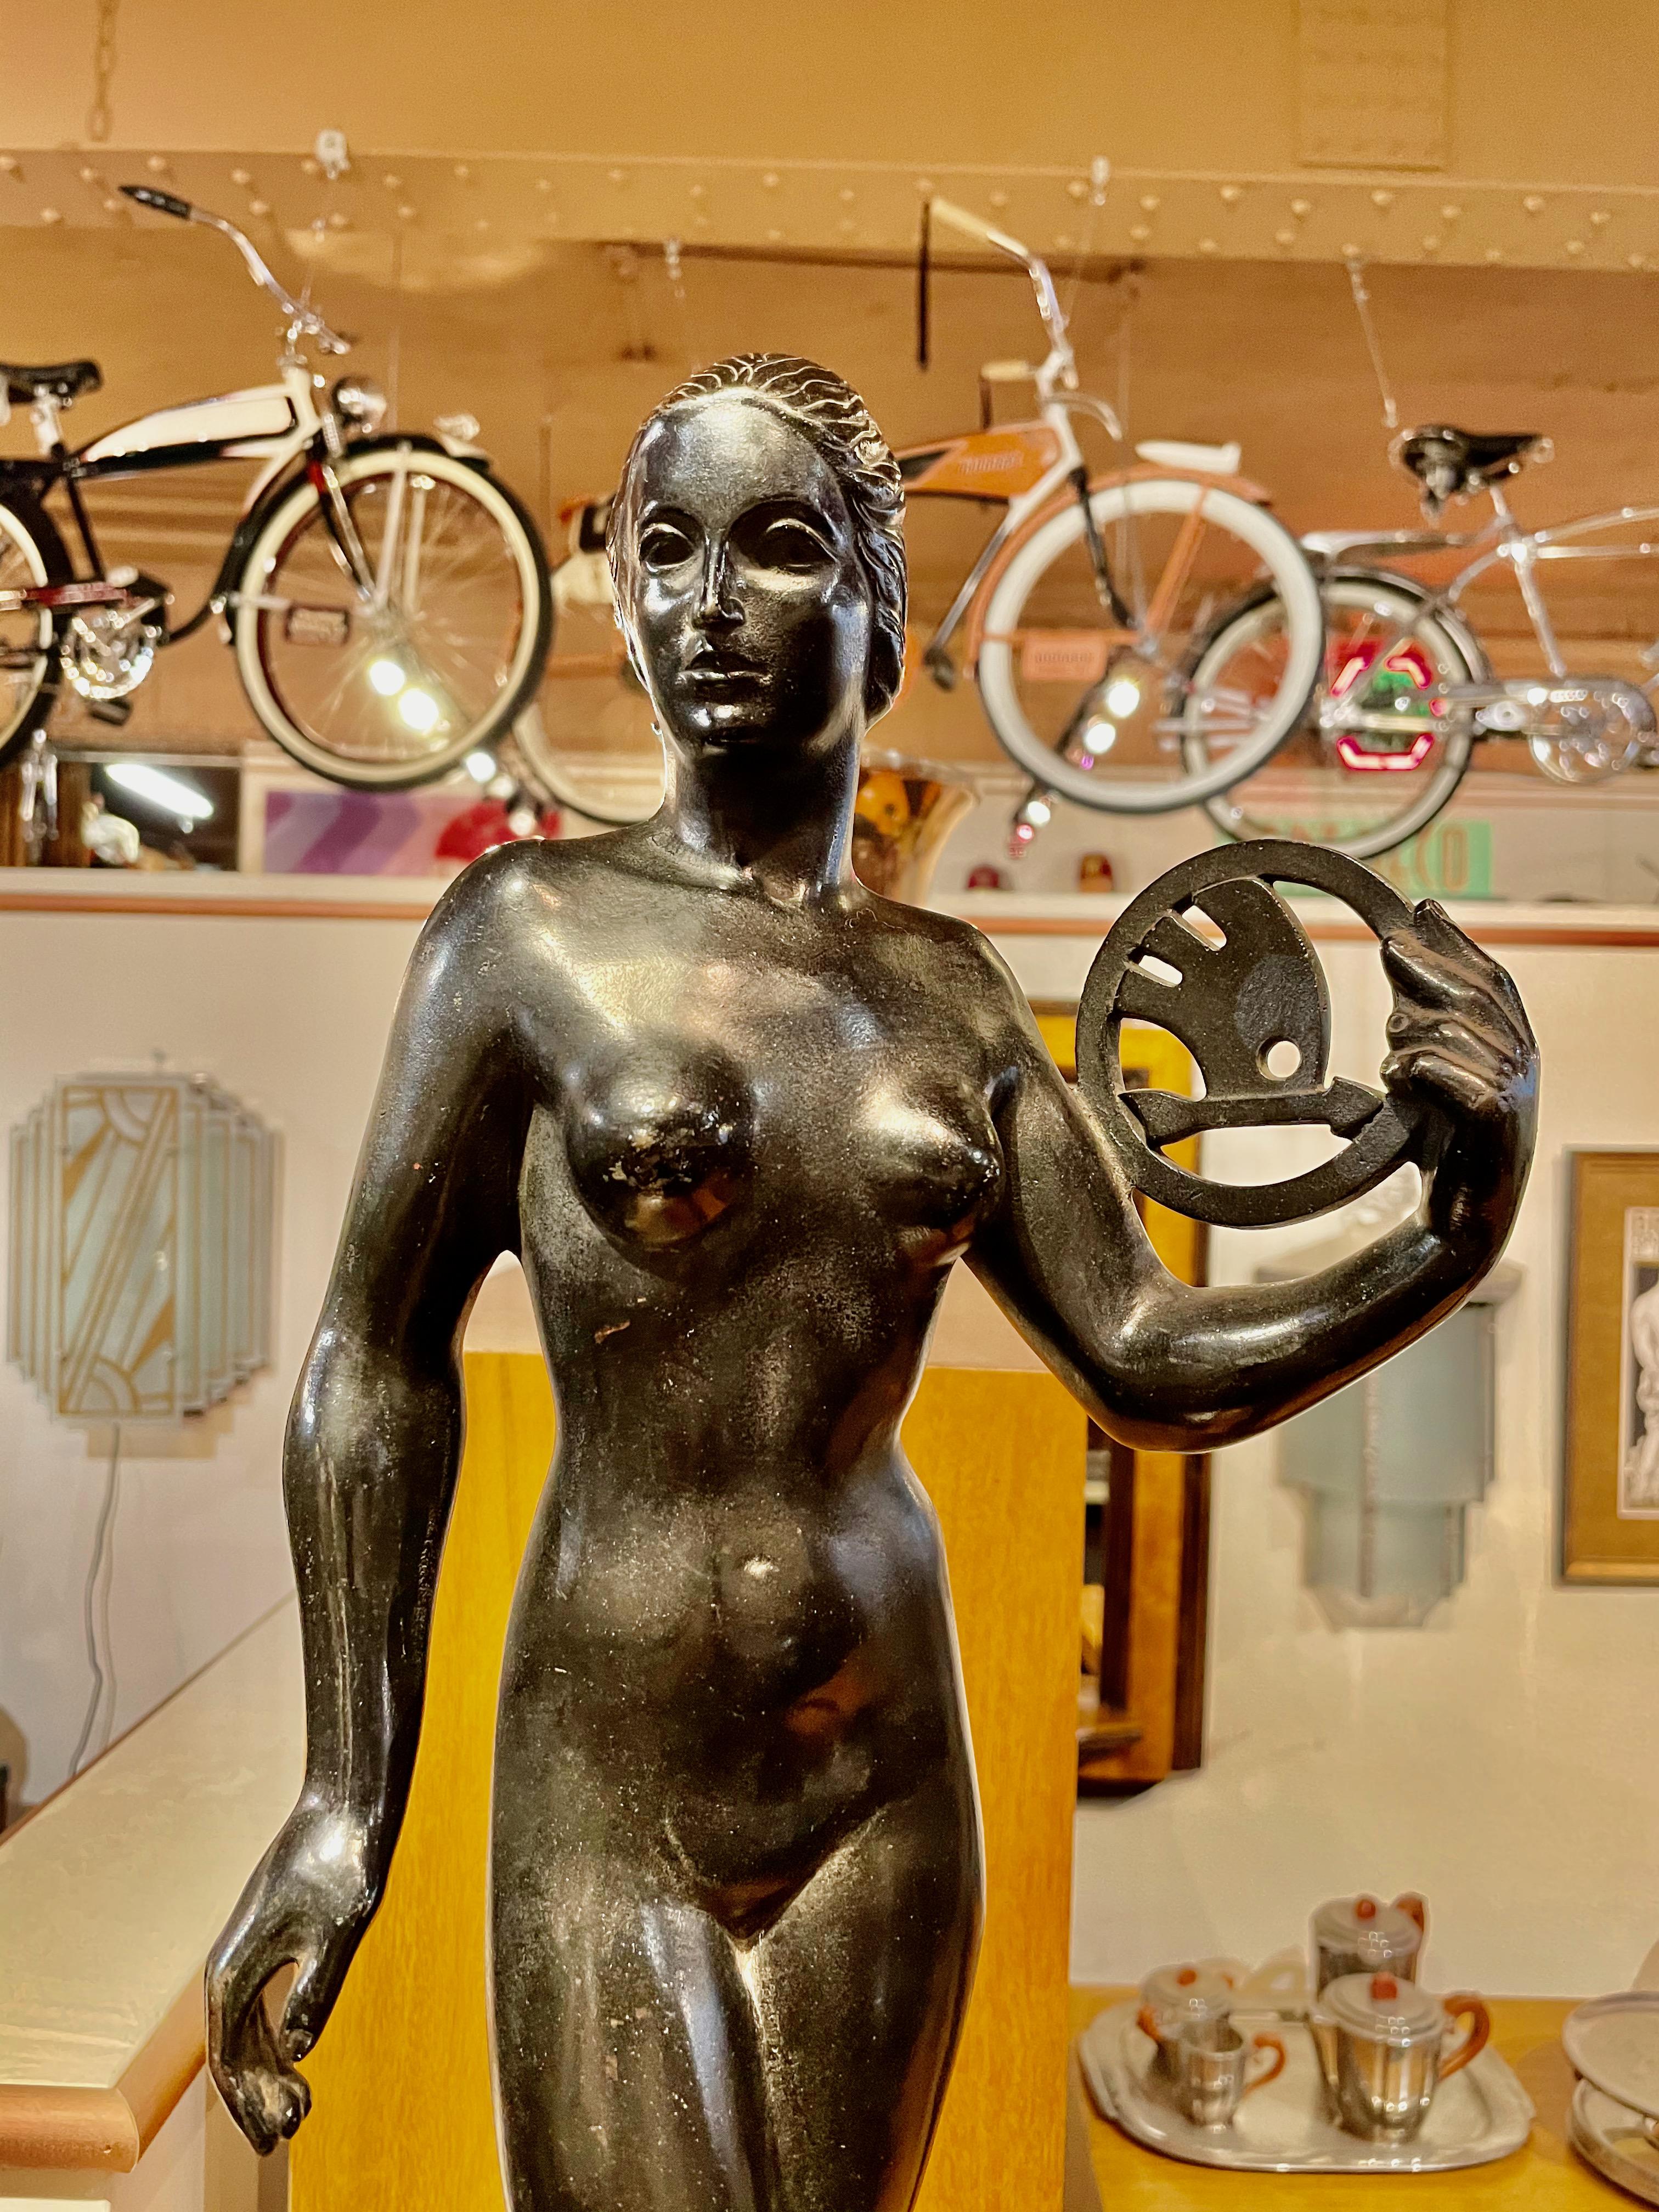 Original bronze Art Deco Czech sculpture for Skoda Automobiles. The most famous car company from the Czech Republic with roots all the way from 1895 making bicycles, motorbikes and eventually making cars. They merged with Pizen Skodovka Co in 1925